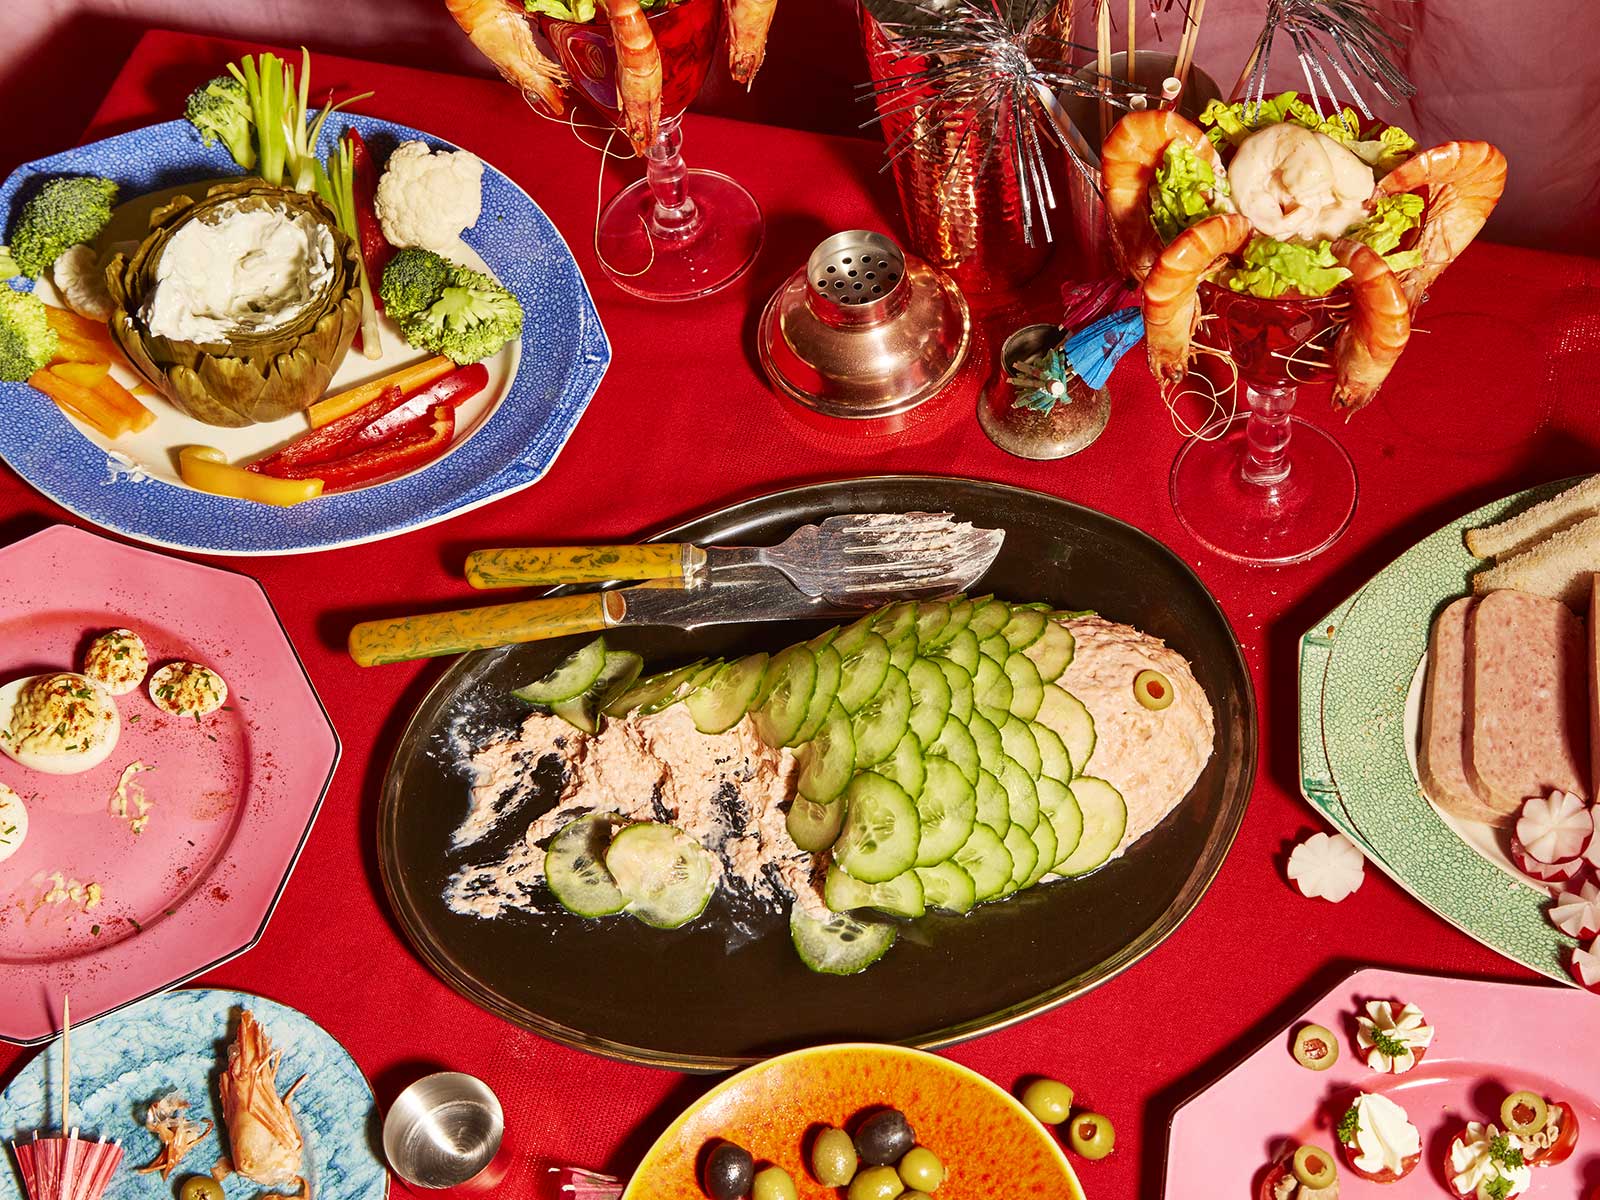 Graceland: Food Photography Inspired by Elvis and Priscilla’s Fantasy Wedding Buffet